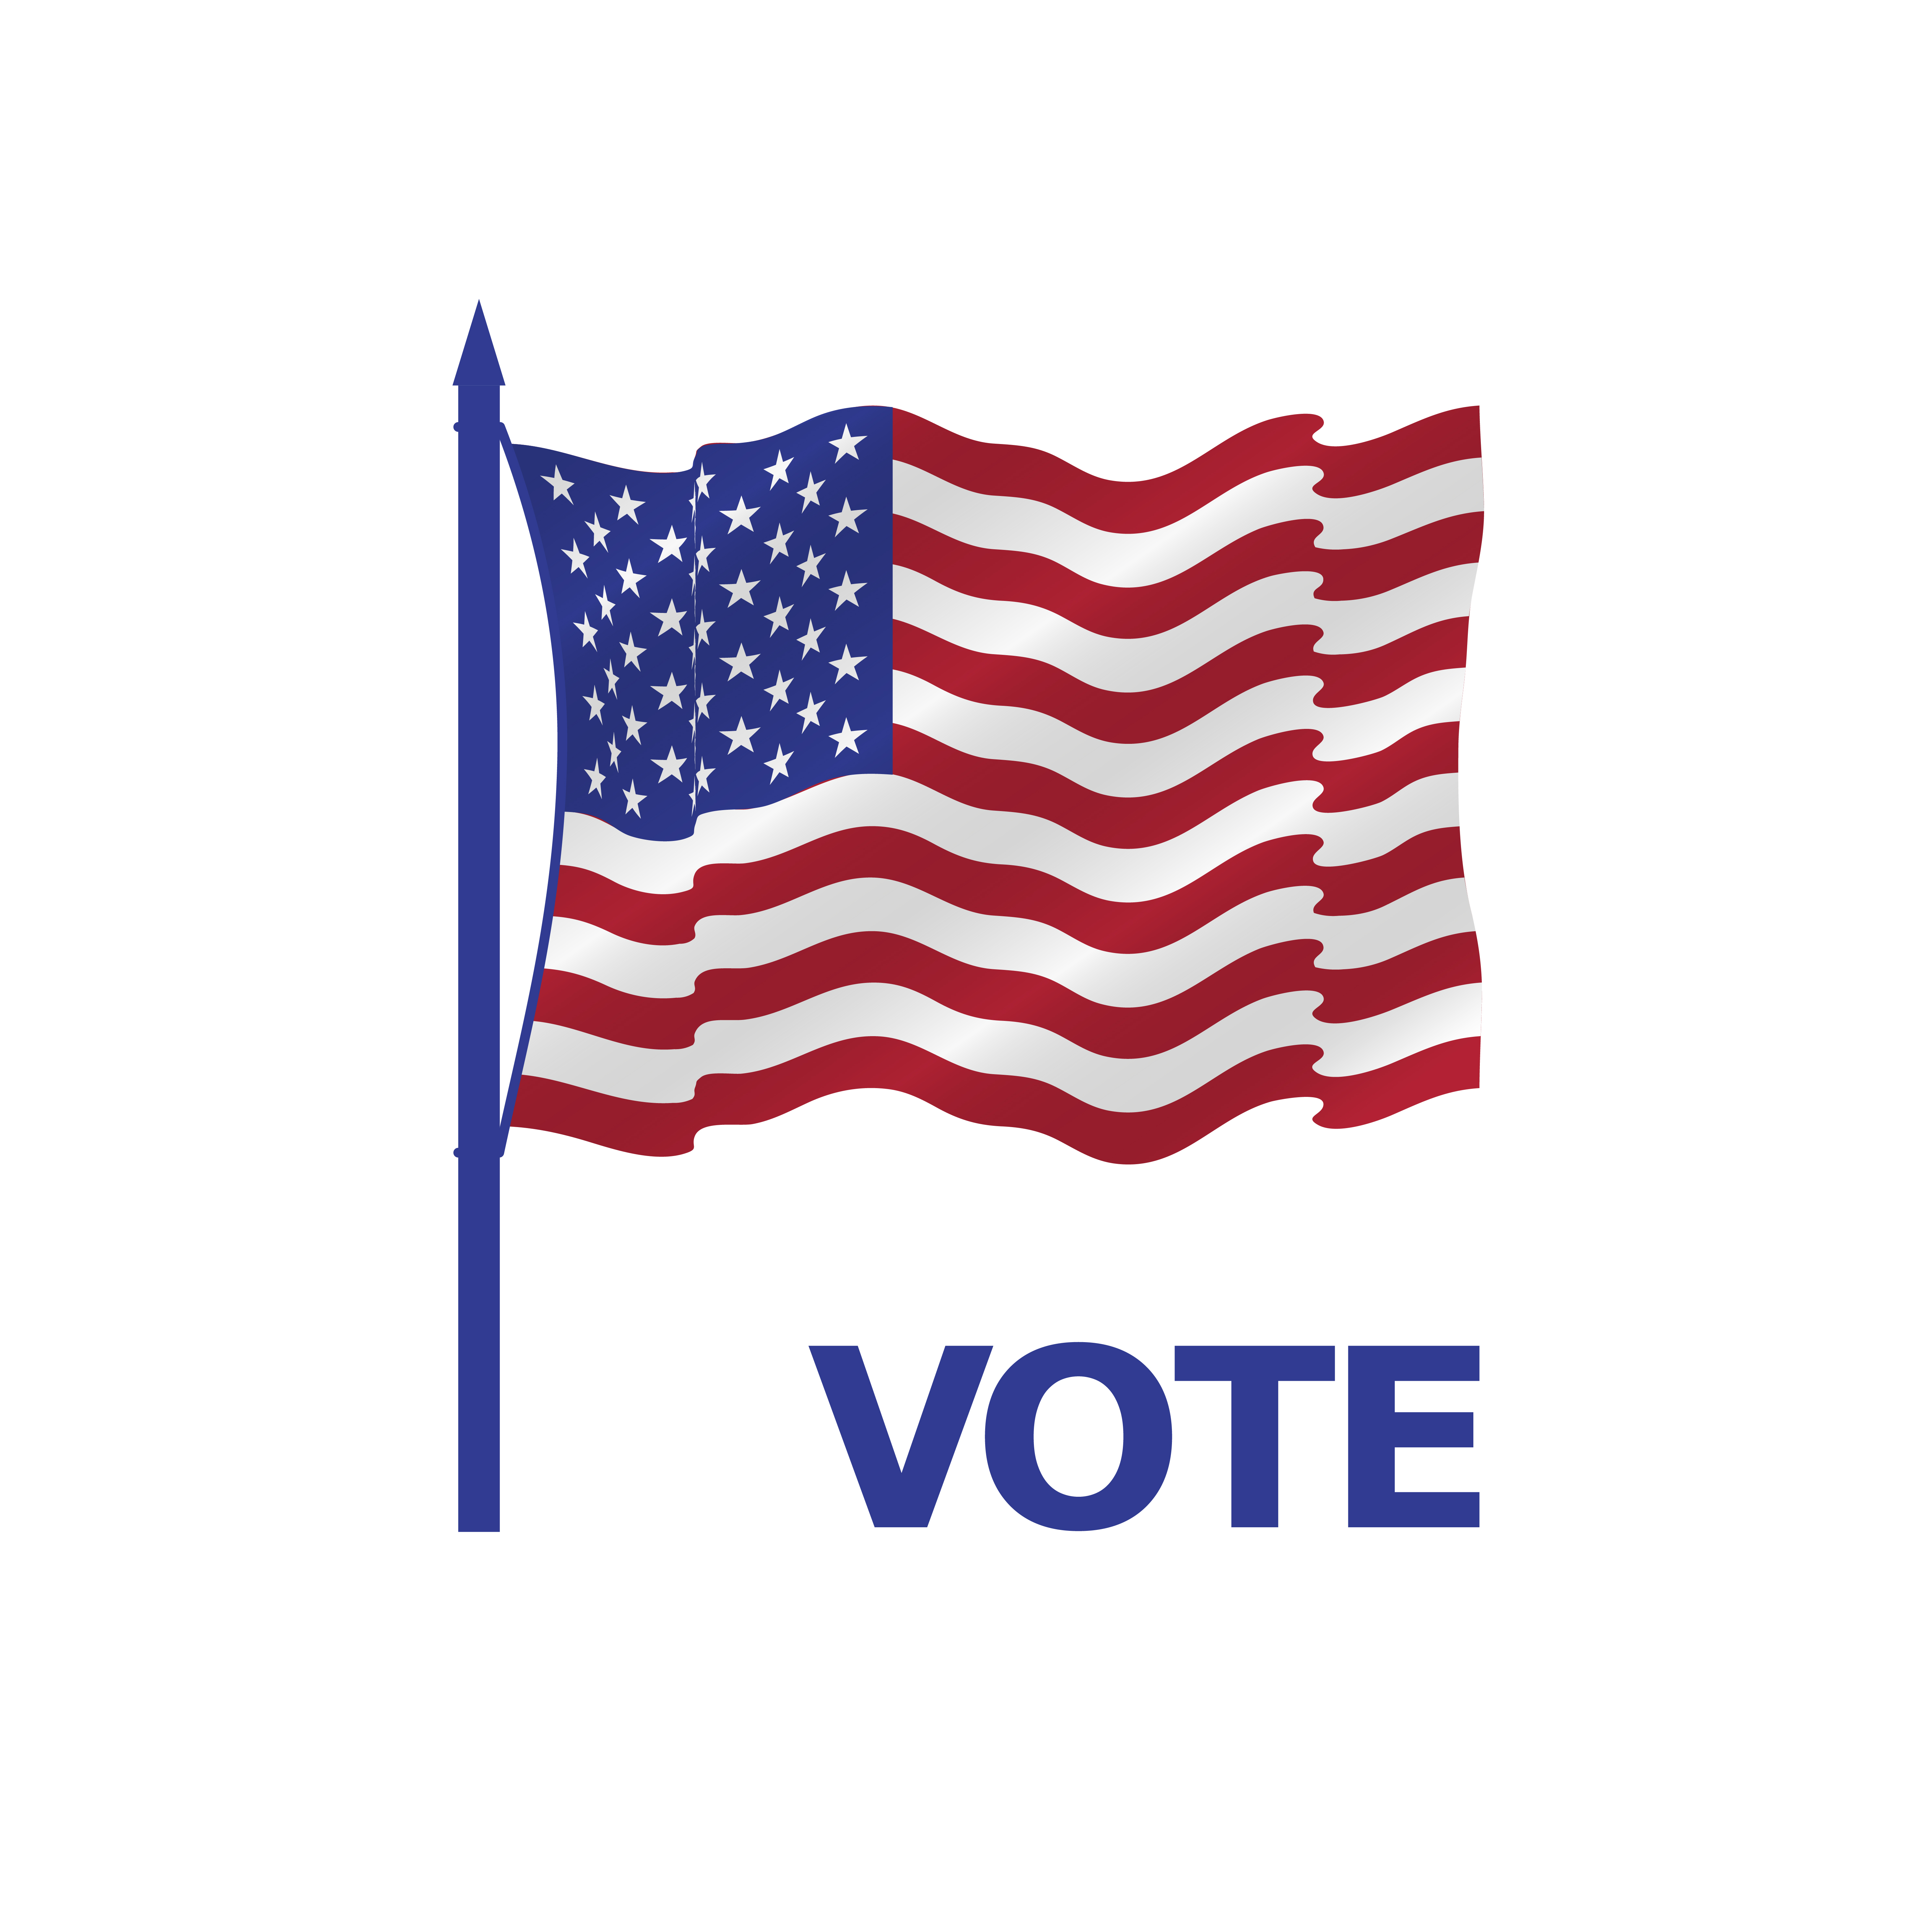 VOTE HERE. Polling place sign. 2020 United States presidential election. Vector illustration.. VOTE HERE. Polling place sign